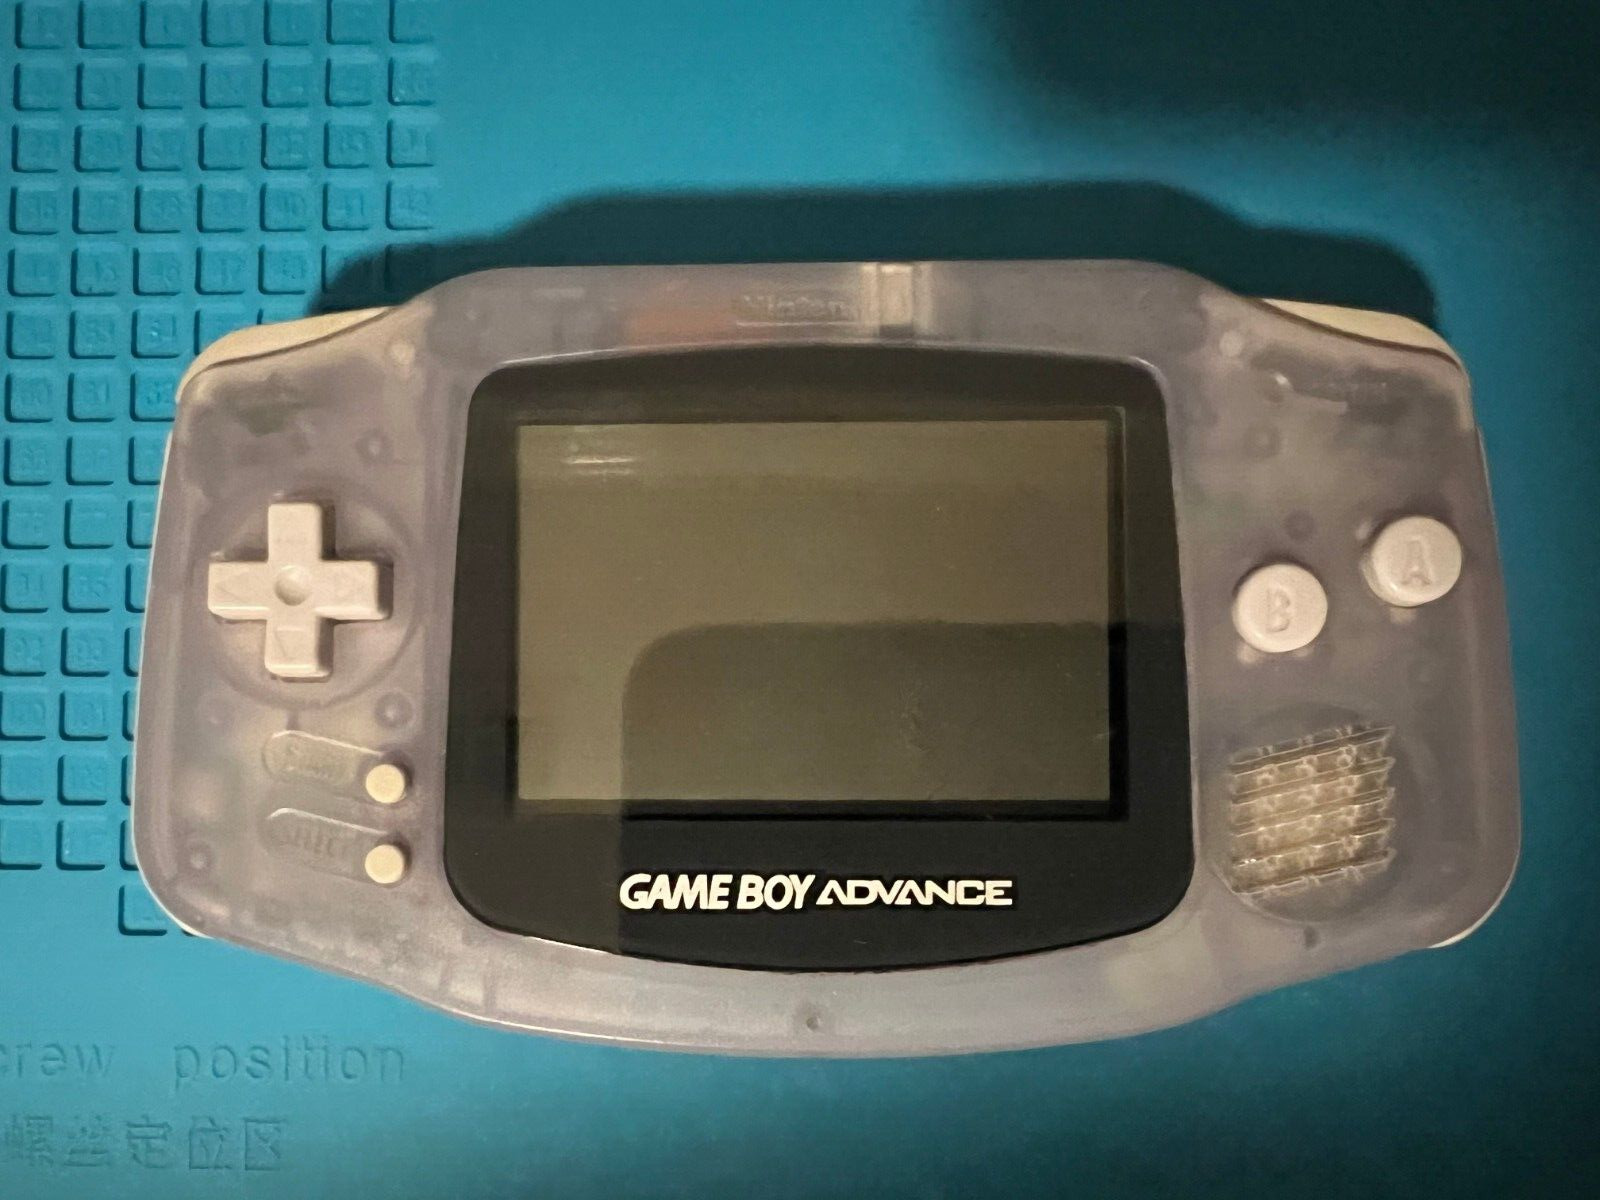 CLEAR GLACIER Nintendo Gameboy Advance AGB-001 - Missing Battery Cover